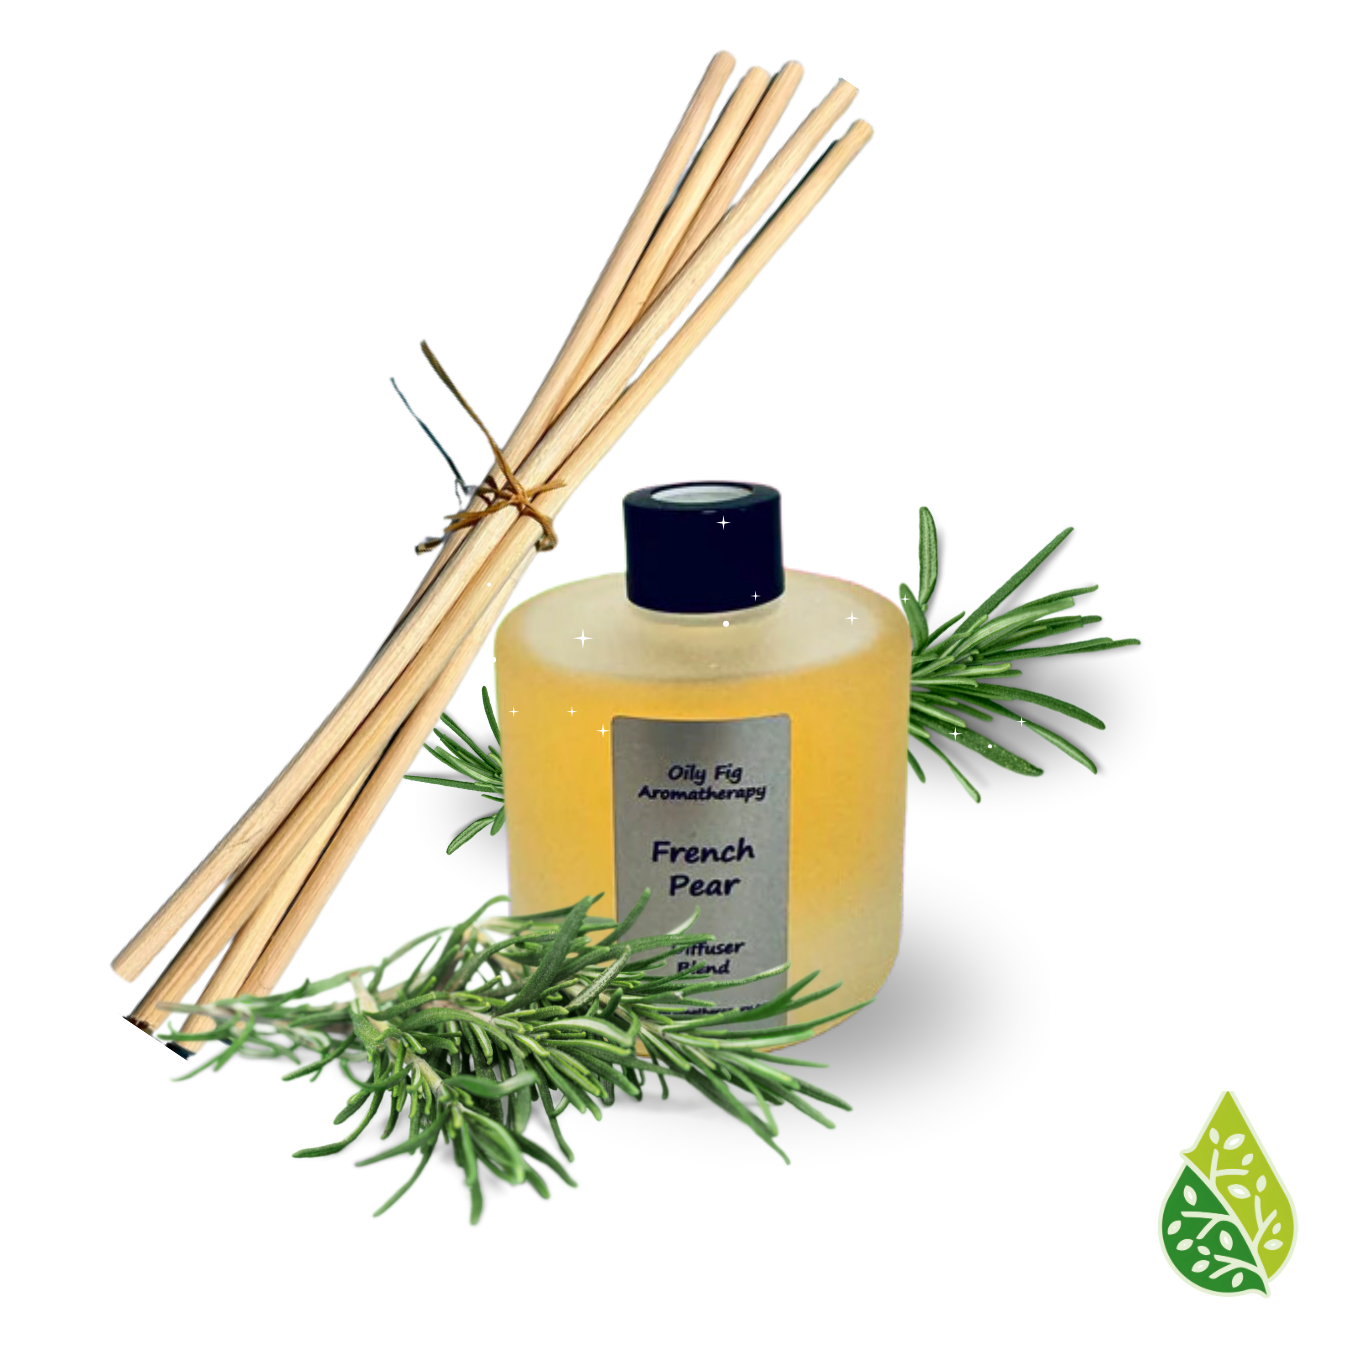 Aromatherapy elegance: French Pear reed diffuser the essence of ripe pears.